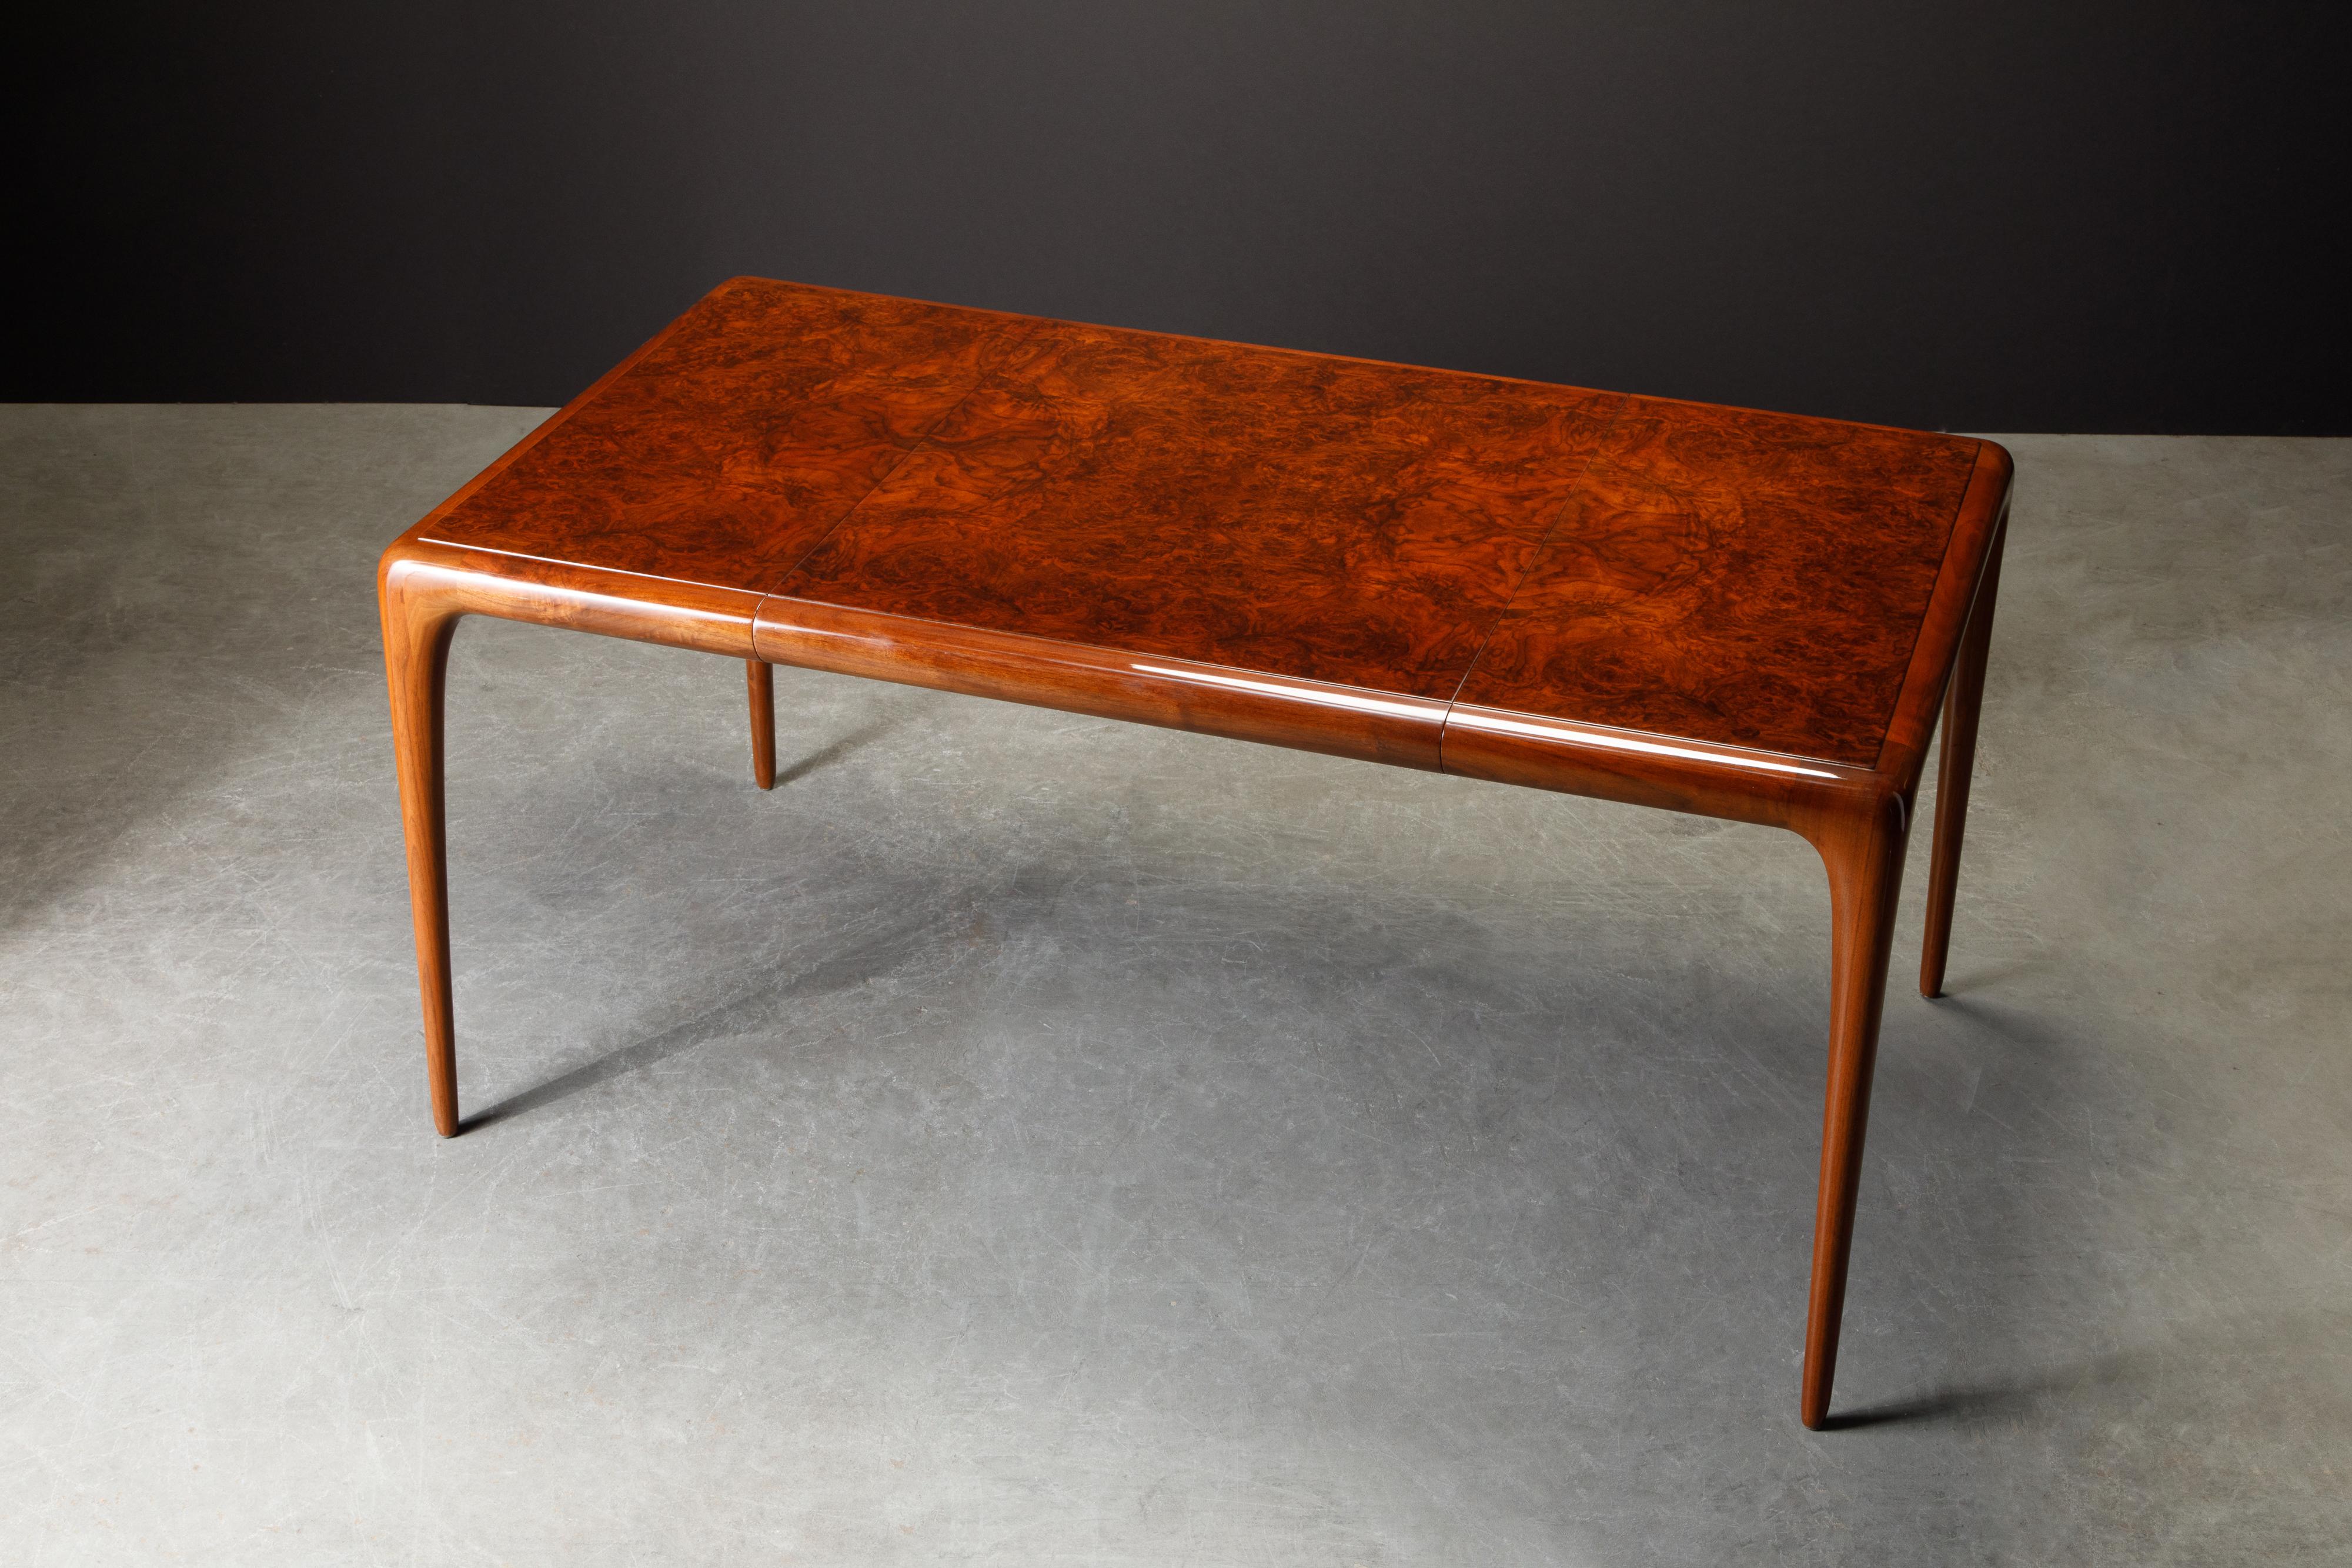 Mid-Century Modern Important Sculptural Table by Vladimir Kagan for Kagan-Dreyfuss, 1950s, Signed